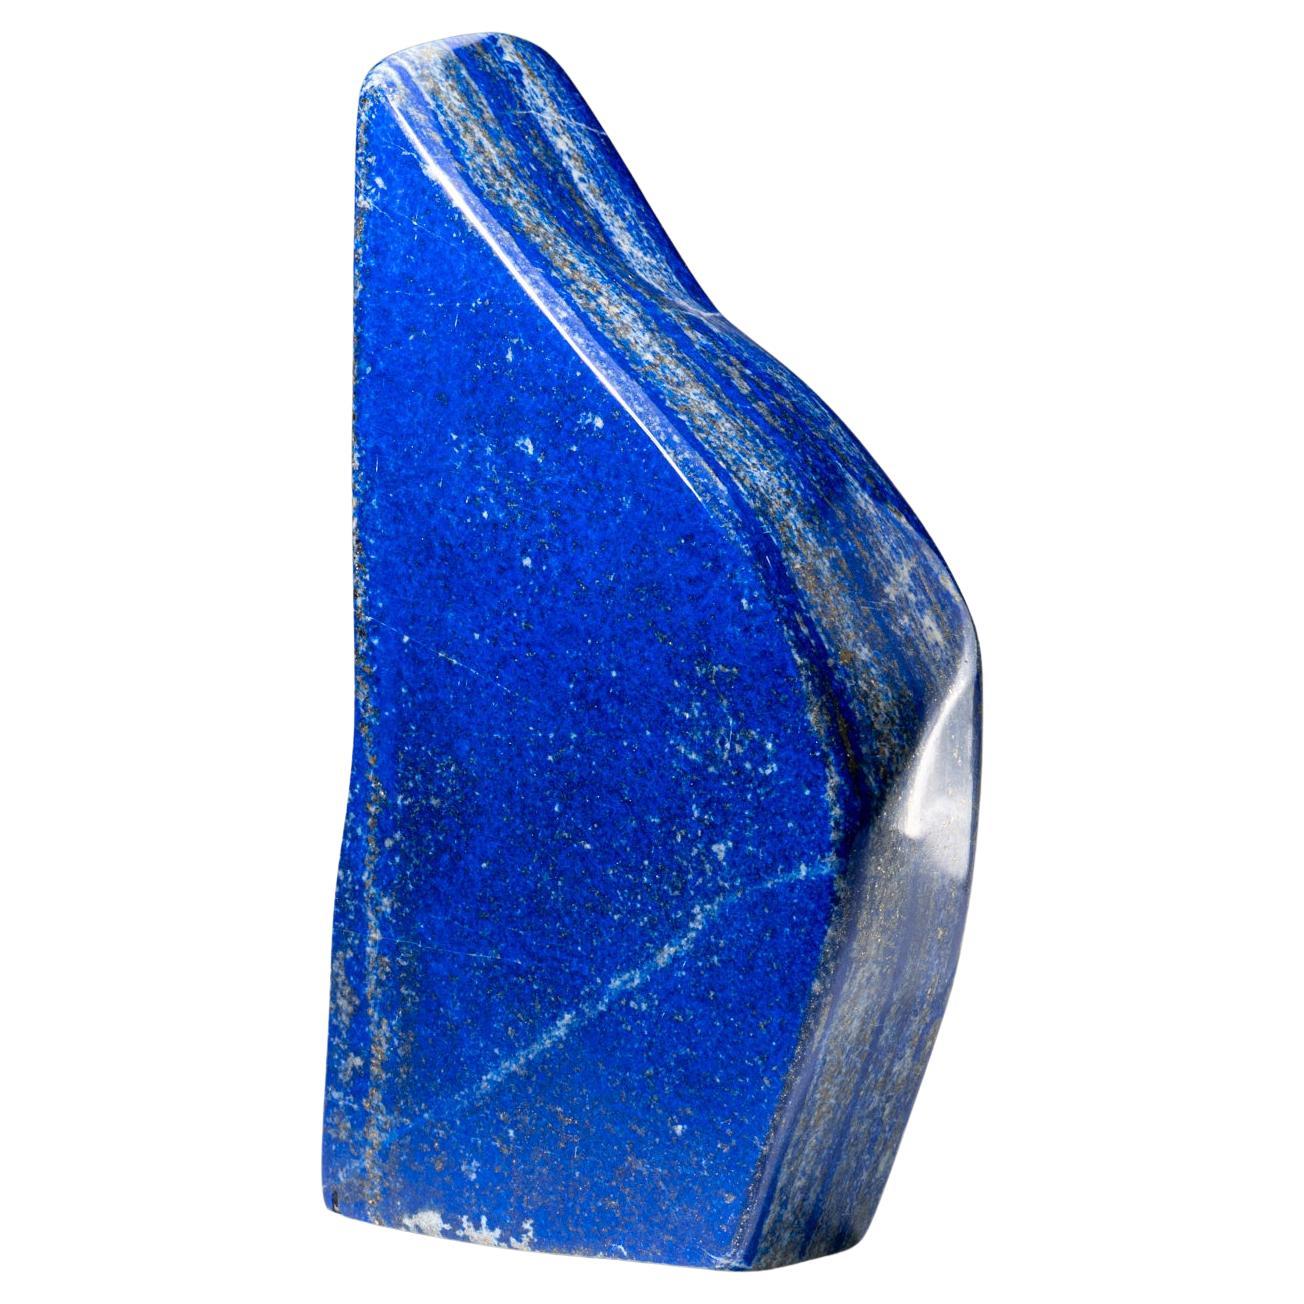 Genuine Polished Lapis Lazuli Freeform from Afghanistan '4 lbs' For Sale